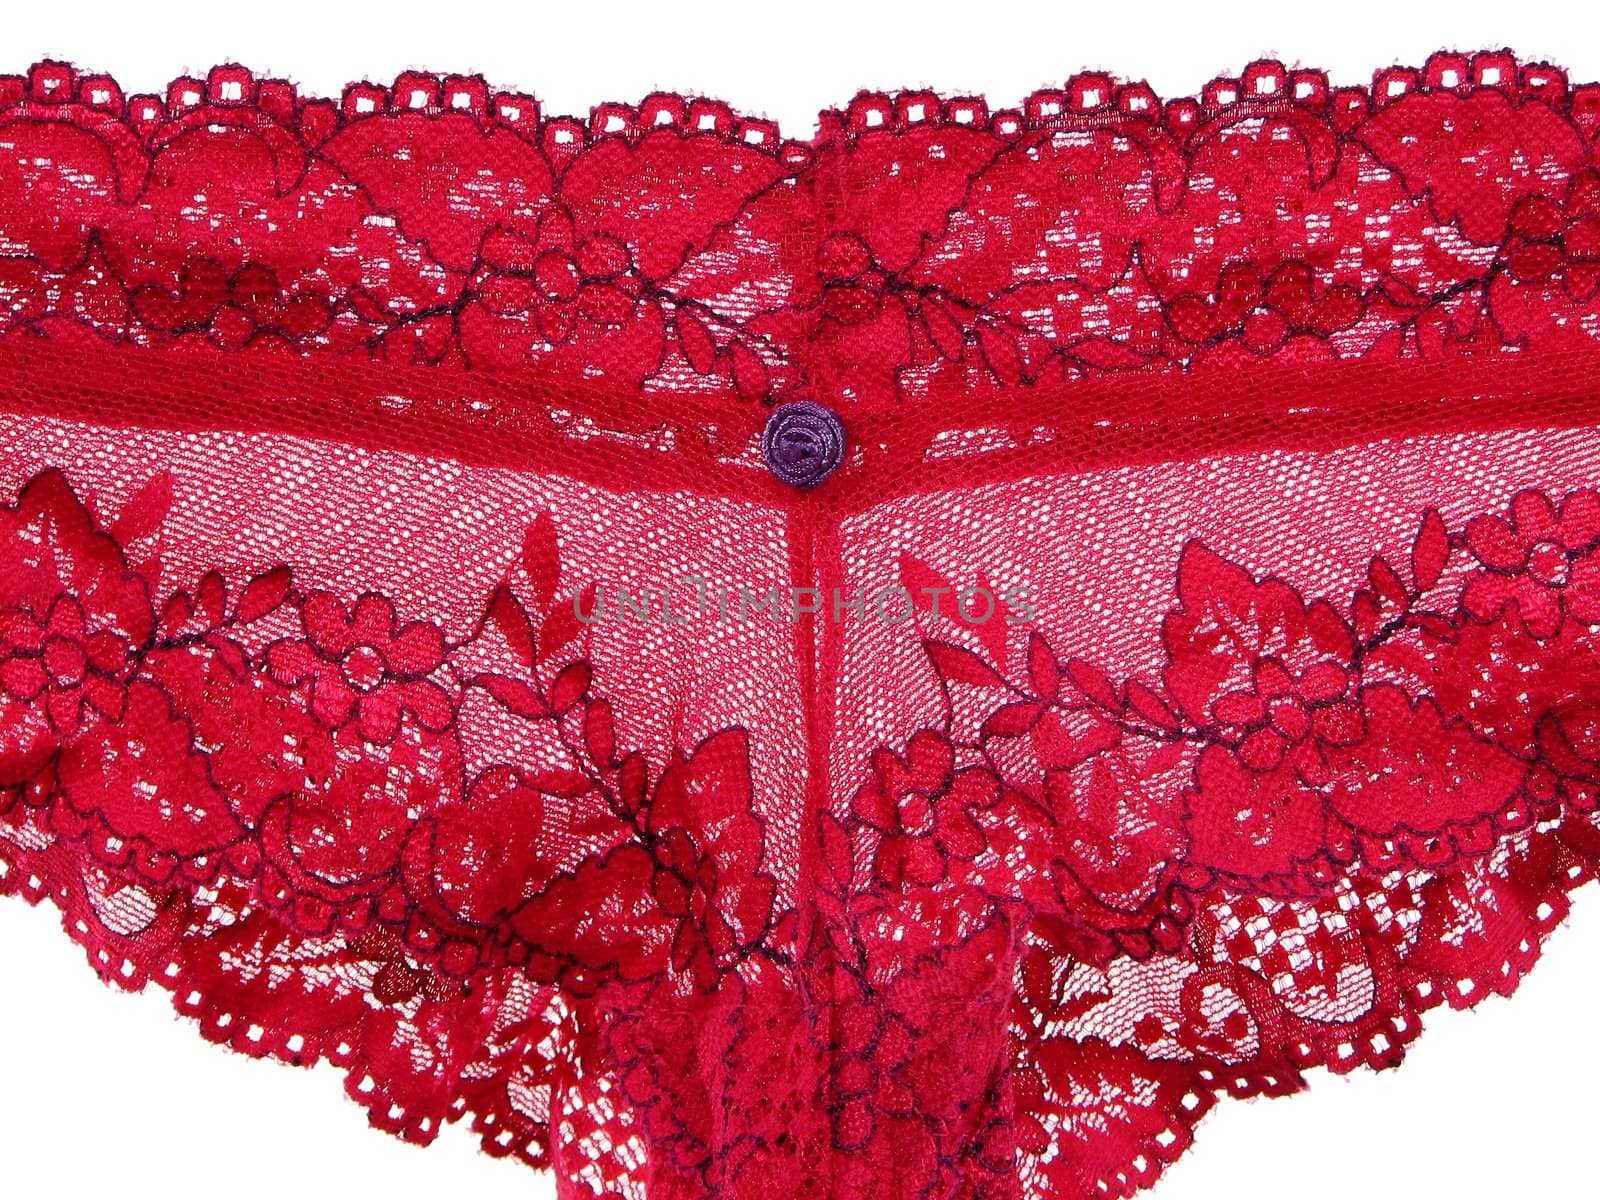 Sexy underwear. Closeup of red lacy panties on white background.